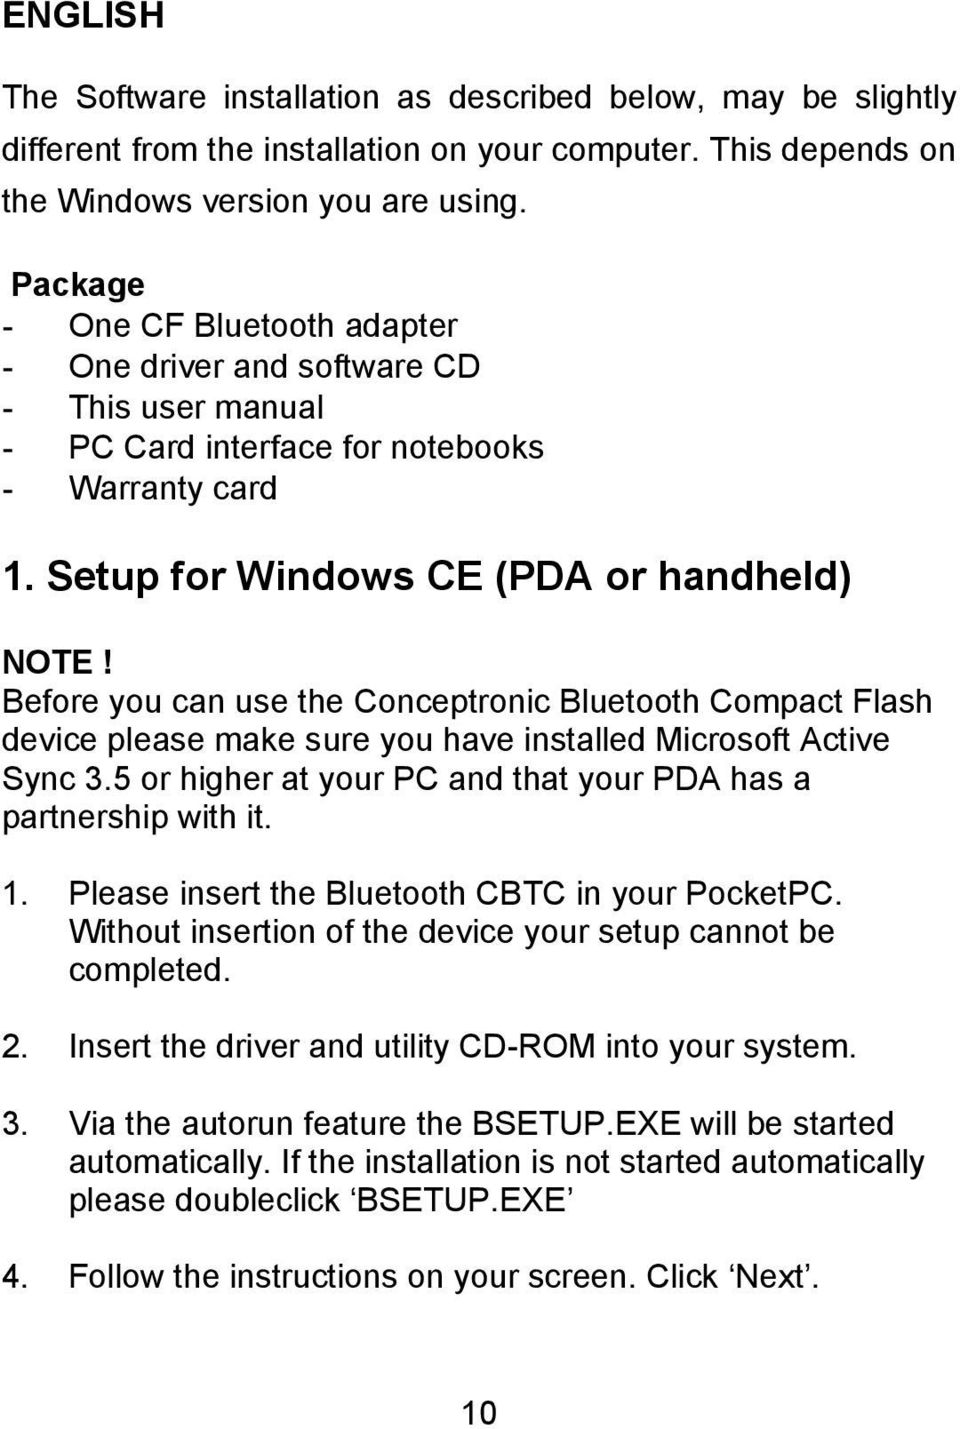 Before you can use the Conceptronic Bluetooth Compact Flash device please make sure you have installed Microsoft Active Sync 3.5 or higher at your PC and that your PDA has a partnership with it. 1.